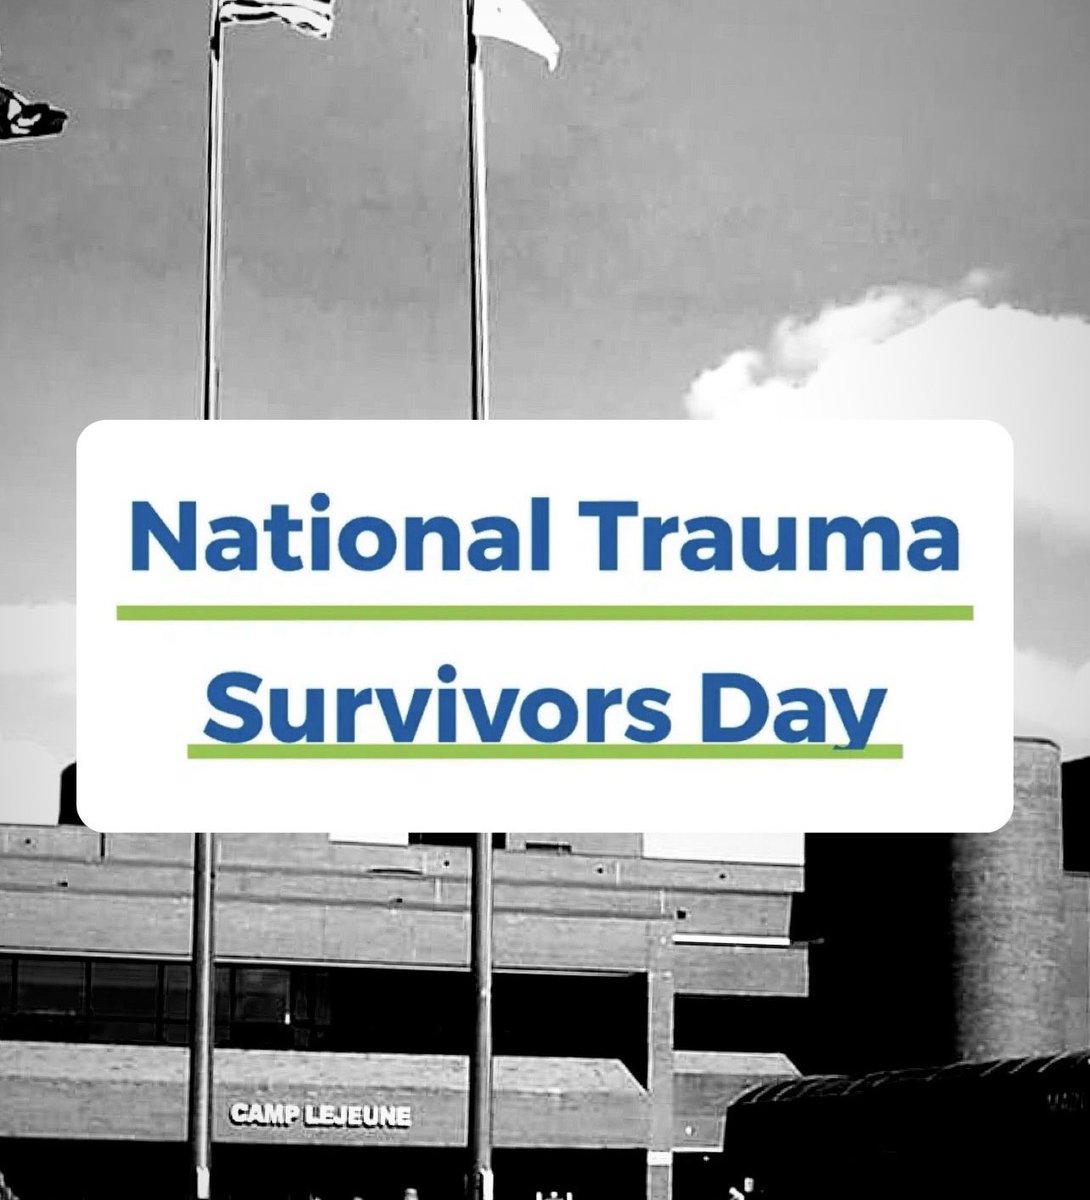 Today, we honor the many trauma patients who are overcoming injury. They amaze us with their resilience each day! #traumasurvivorsday